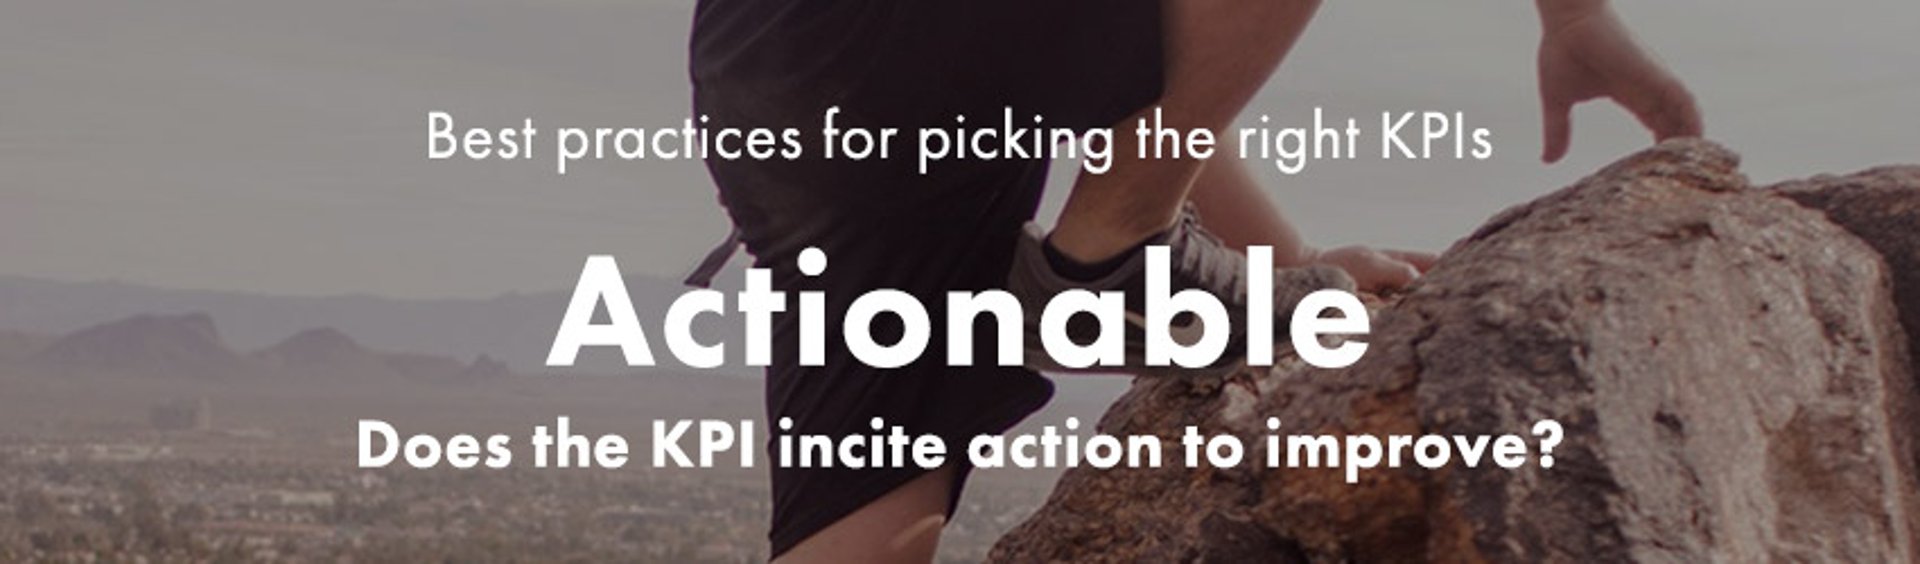 Picking Kpis Best Practices Actionable